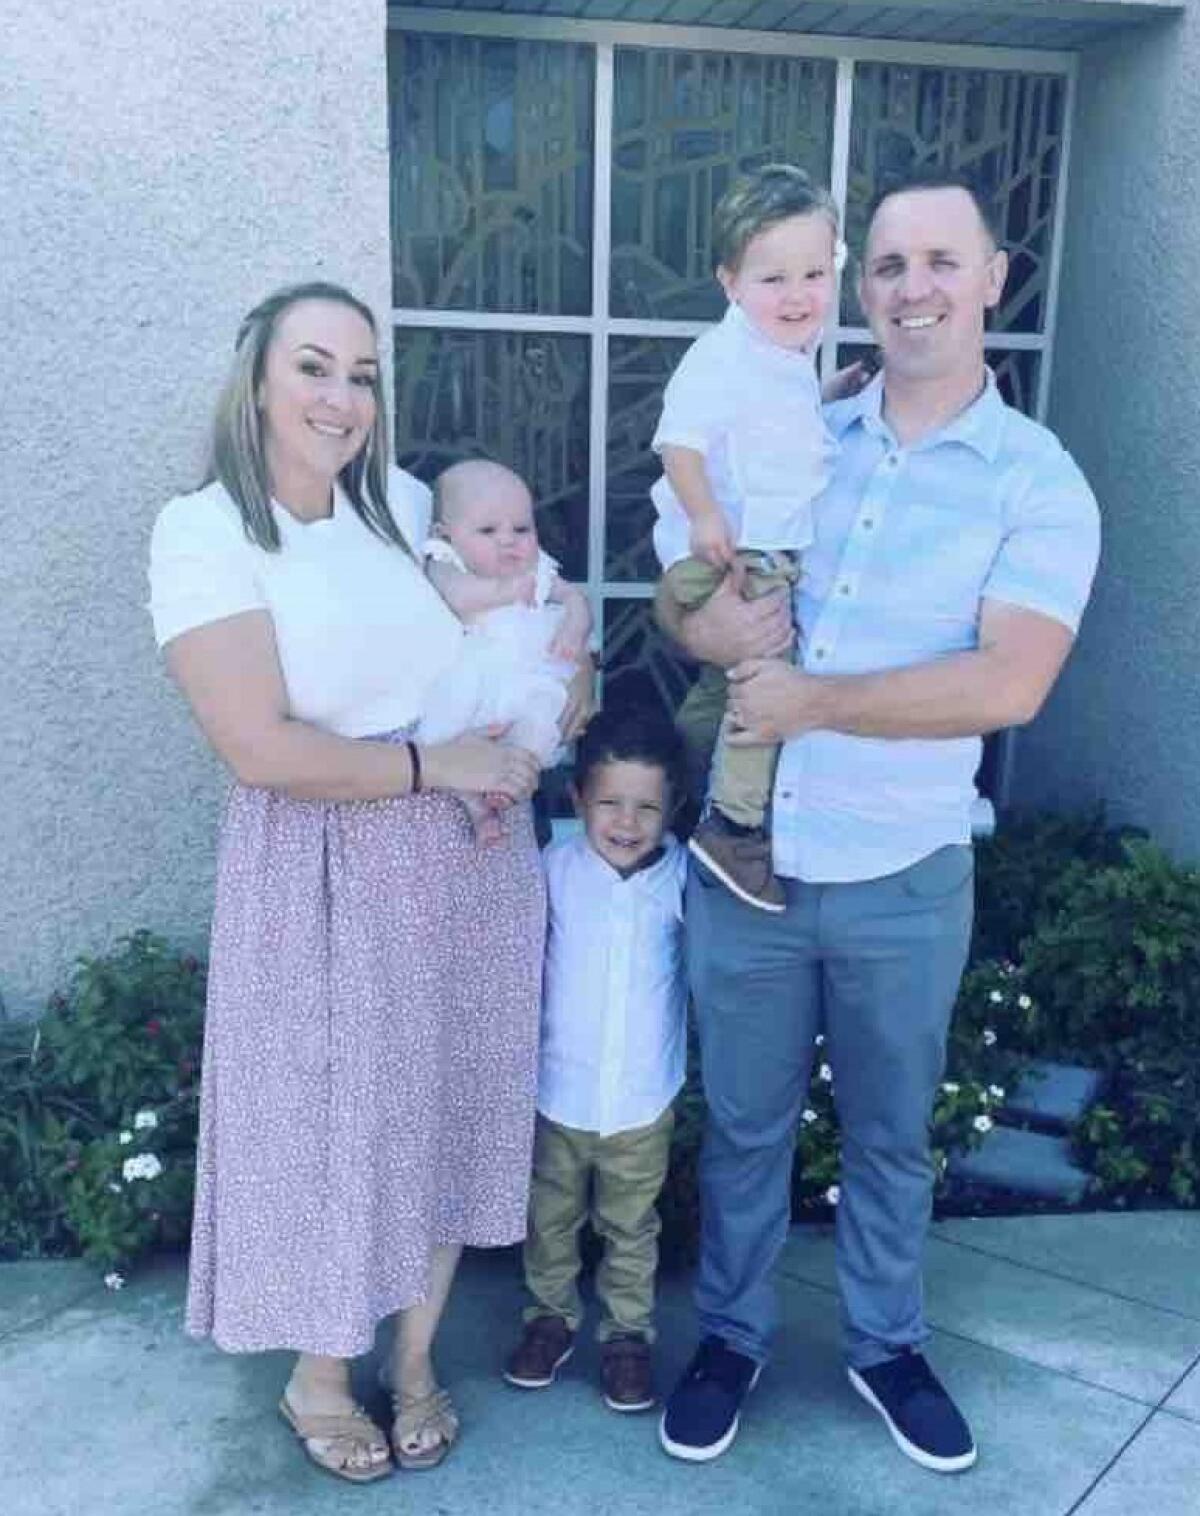 Huntington Beach Police Officer Jeremy Roberts poses for a photo with his wife, Katie Roberts, and their three children.